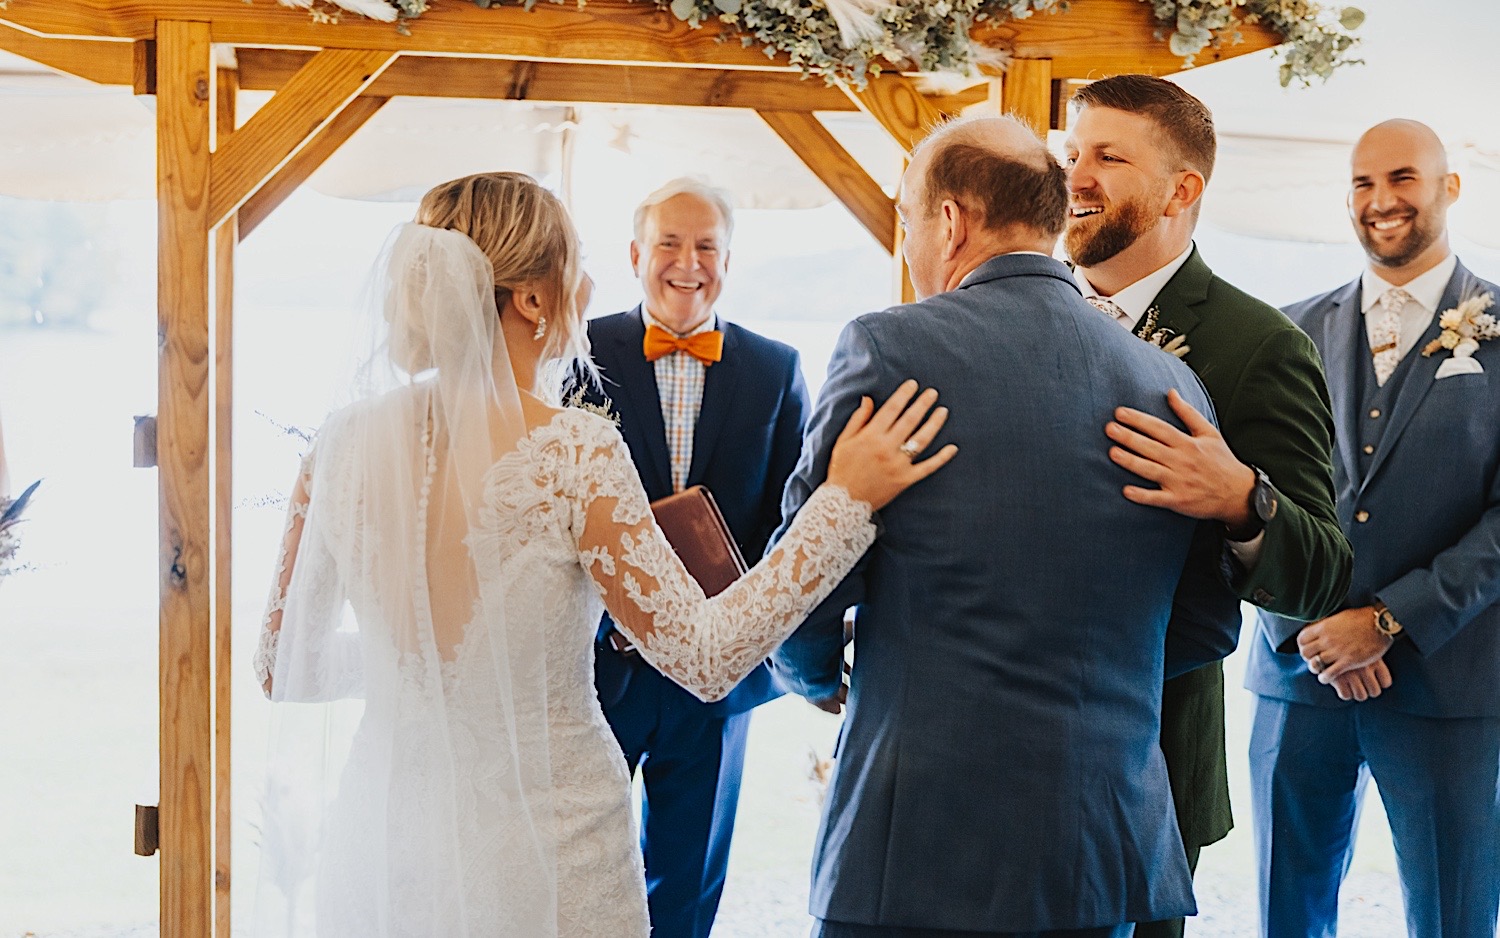 A bride and groom both put their hands on the back of the bride's father after he escorted her down the aisle for her wedding ceremony at Lake Bomoseen Lodge in Vermont